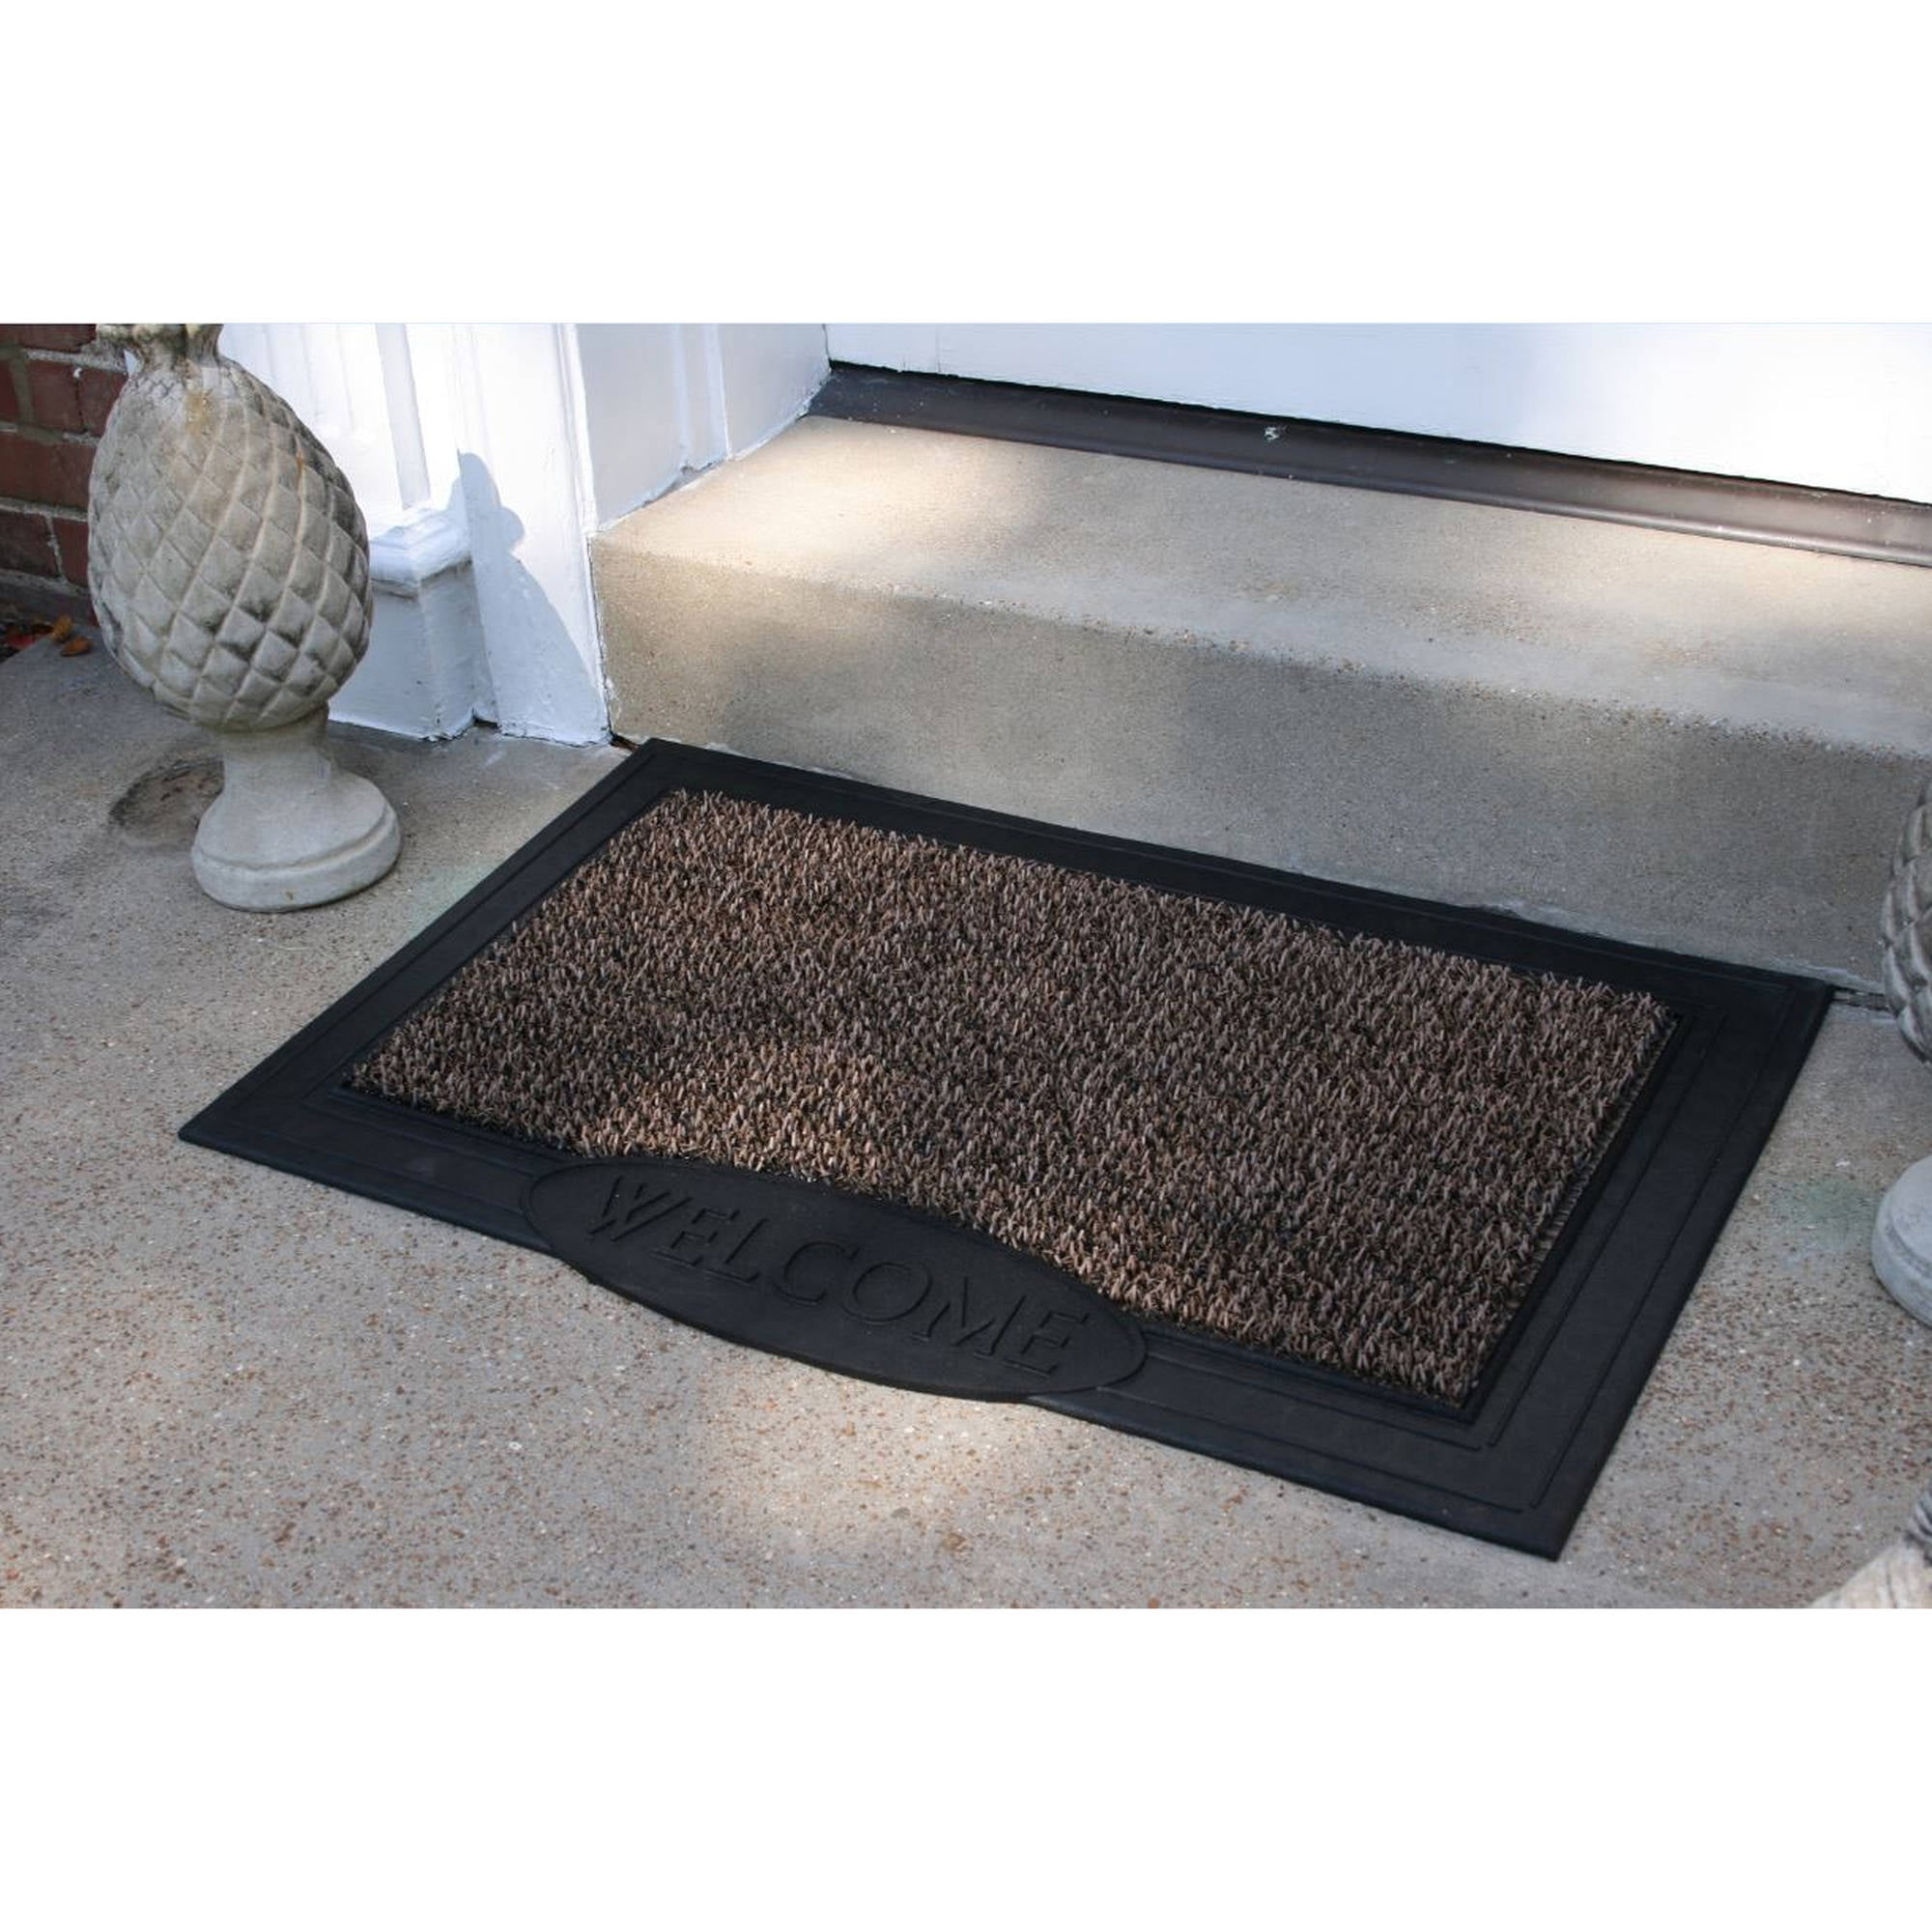 AstroTurf Scraper Doormat, Stems and Leaves, Earth Taupe, 24 x 36-In.